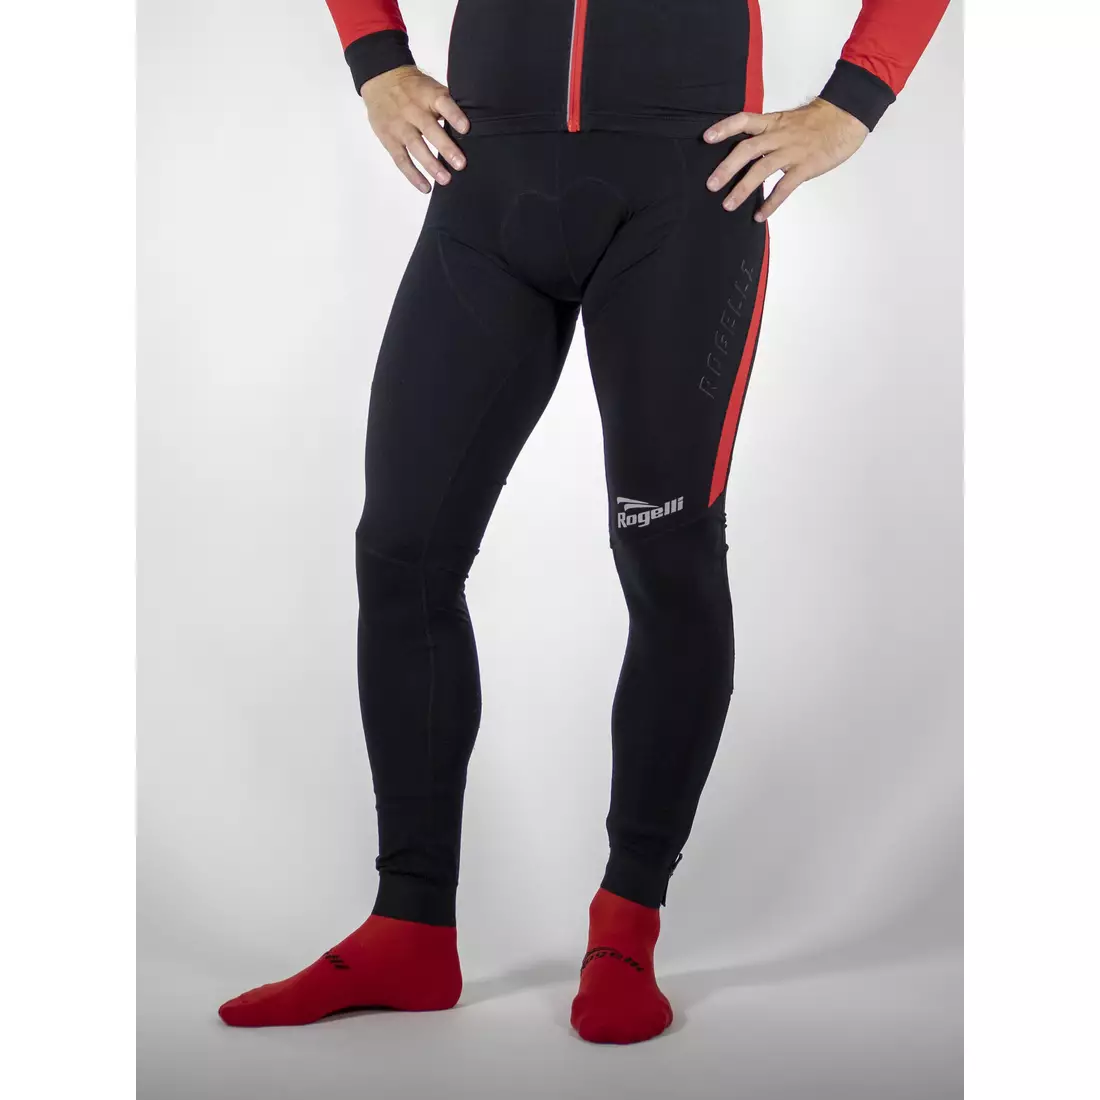 ROGELLI TRAVO 3.0 insulated cycling pants, suspender, black-red